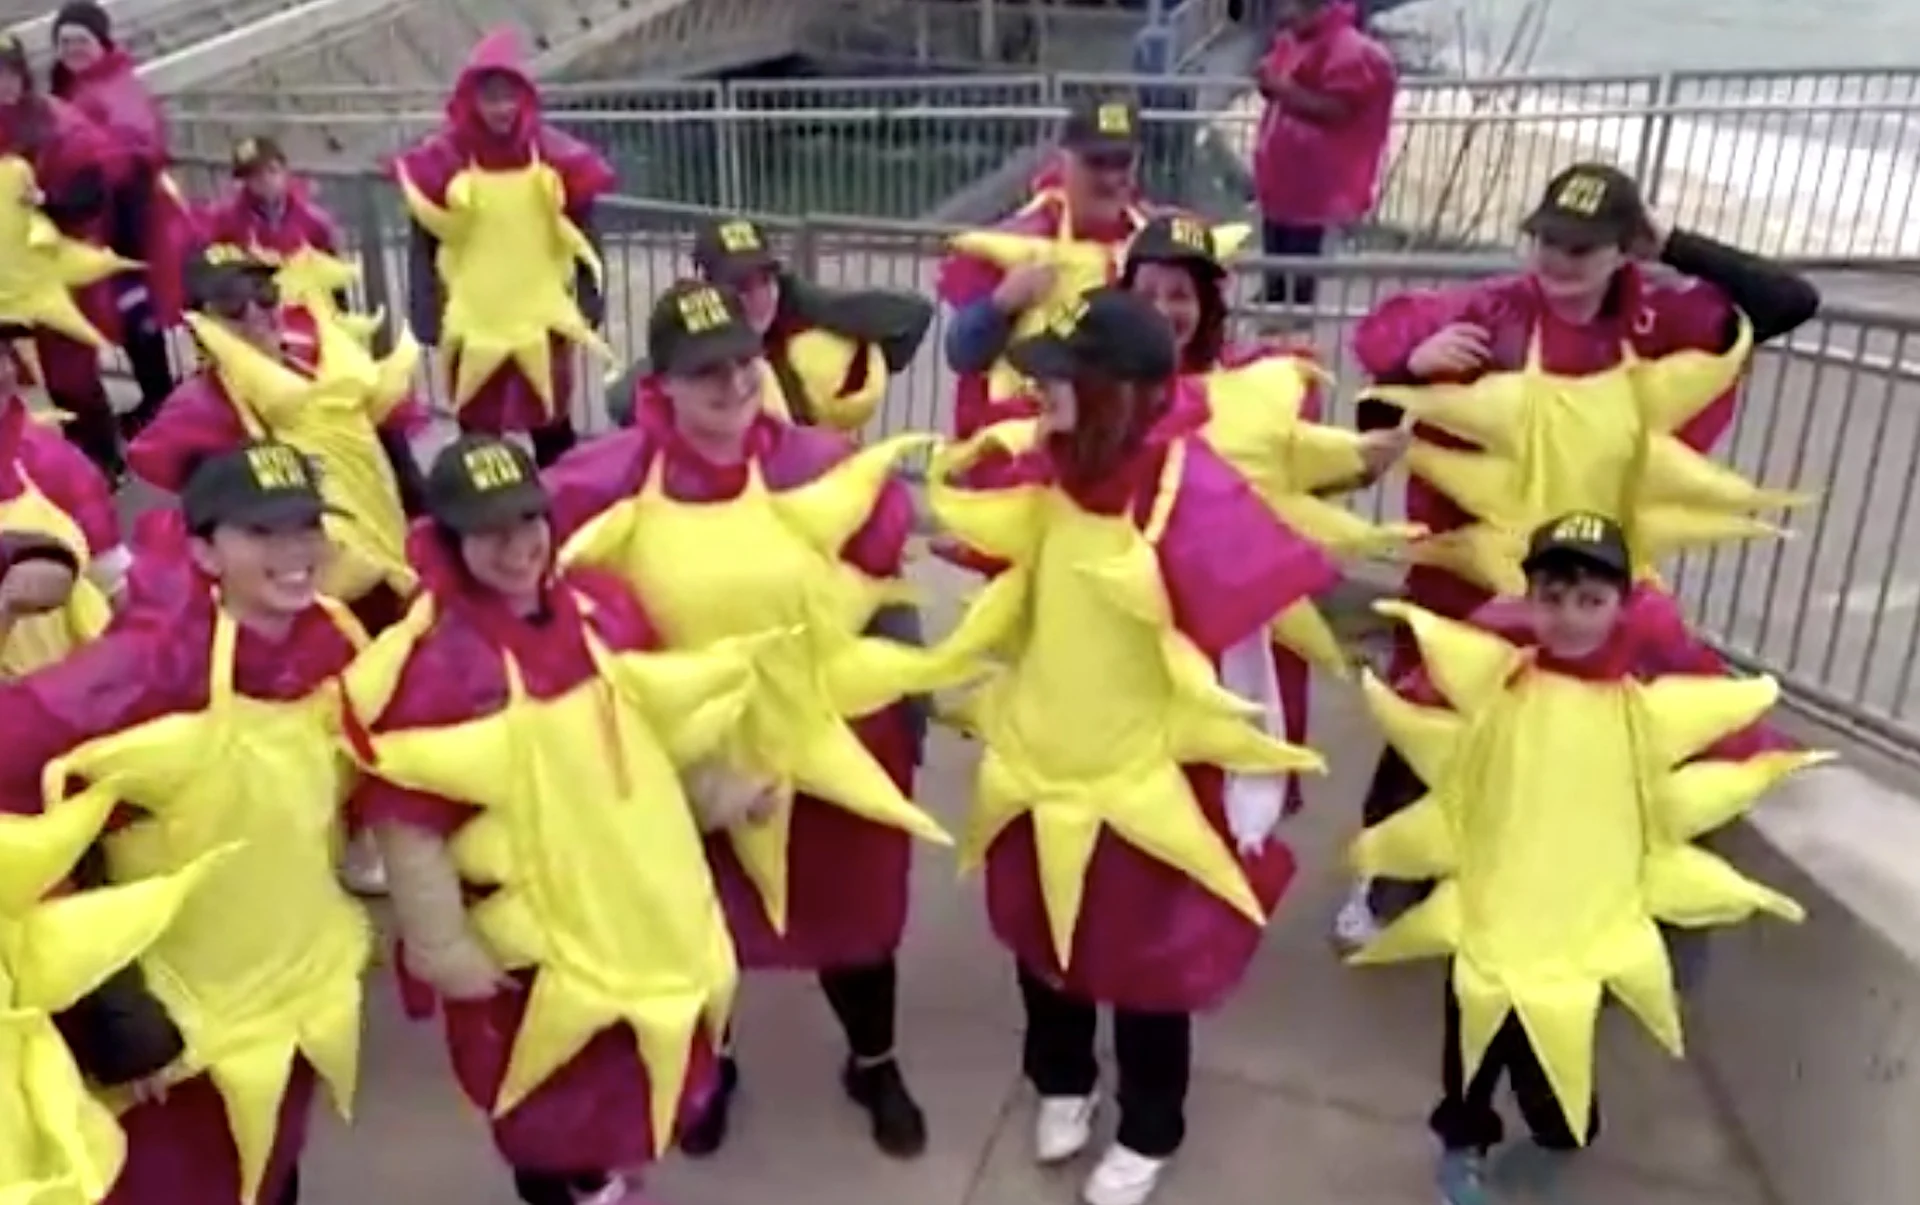 Niagara Falls breaks world record for most people dressed as the sun